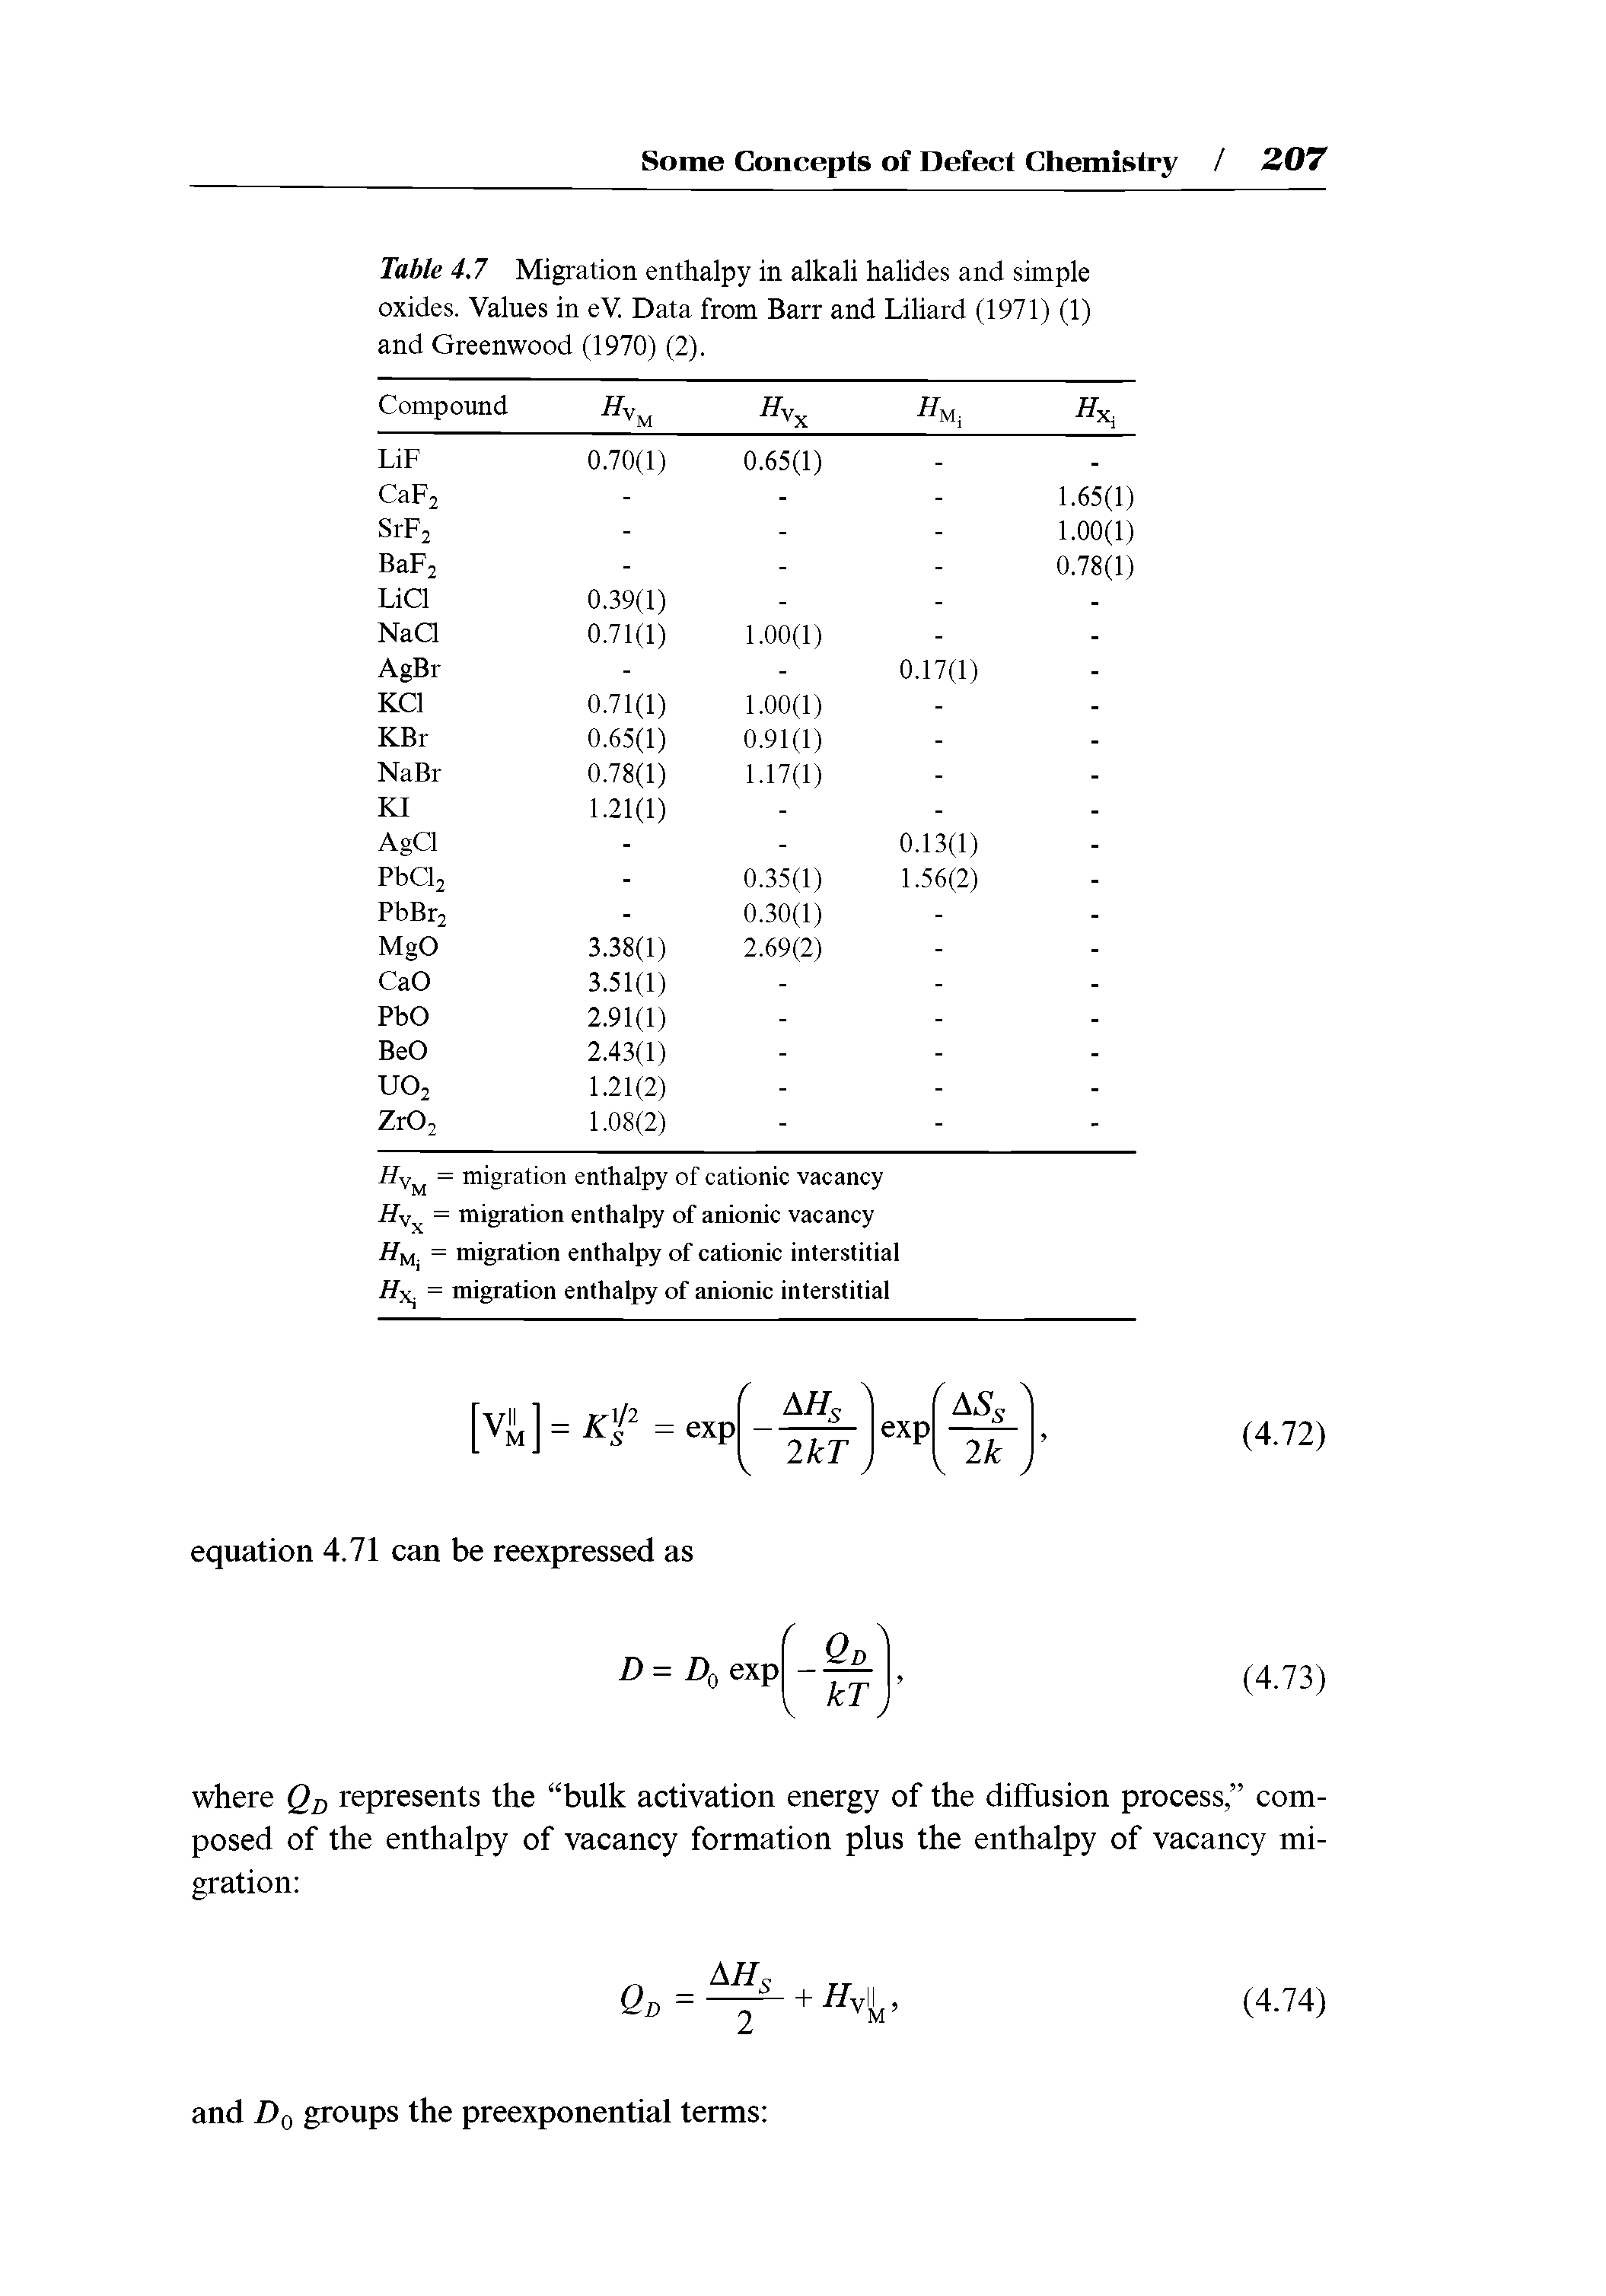 Table 4.7 Migration enthalpy in alkali halides and simple oxides. Values in eV. Data from Barr and Liliard (1971) (1) and Greenwood (1970) (2).